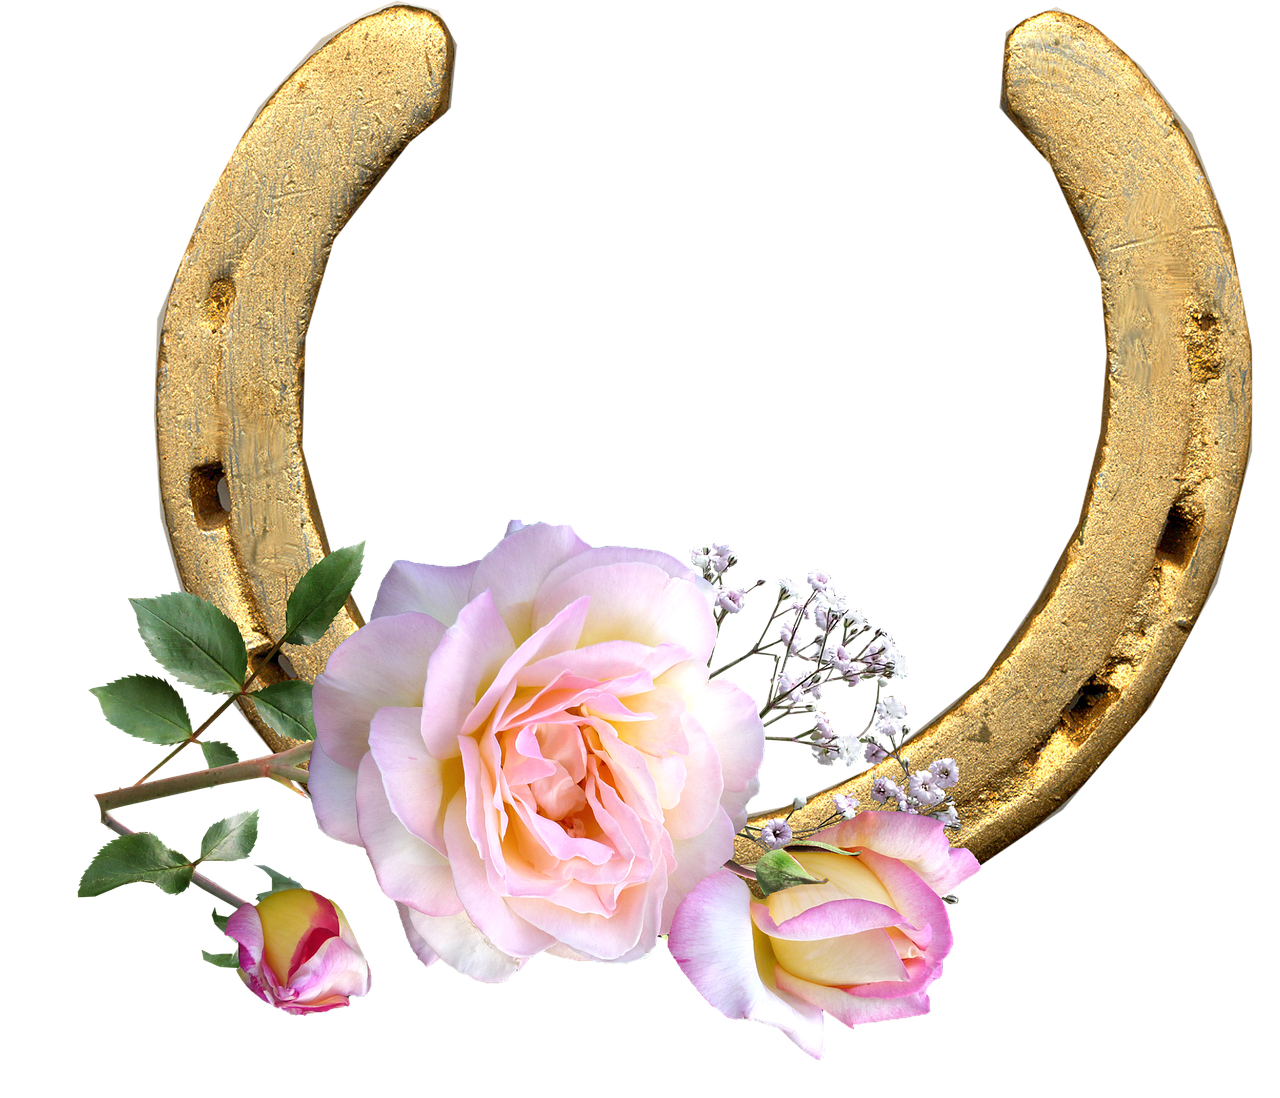 horse shoe peace rose lucky free photo